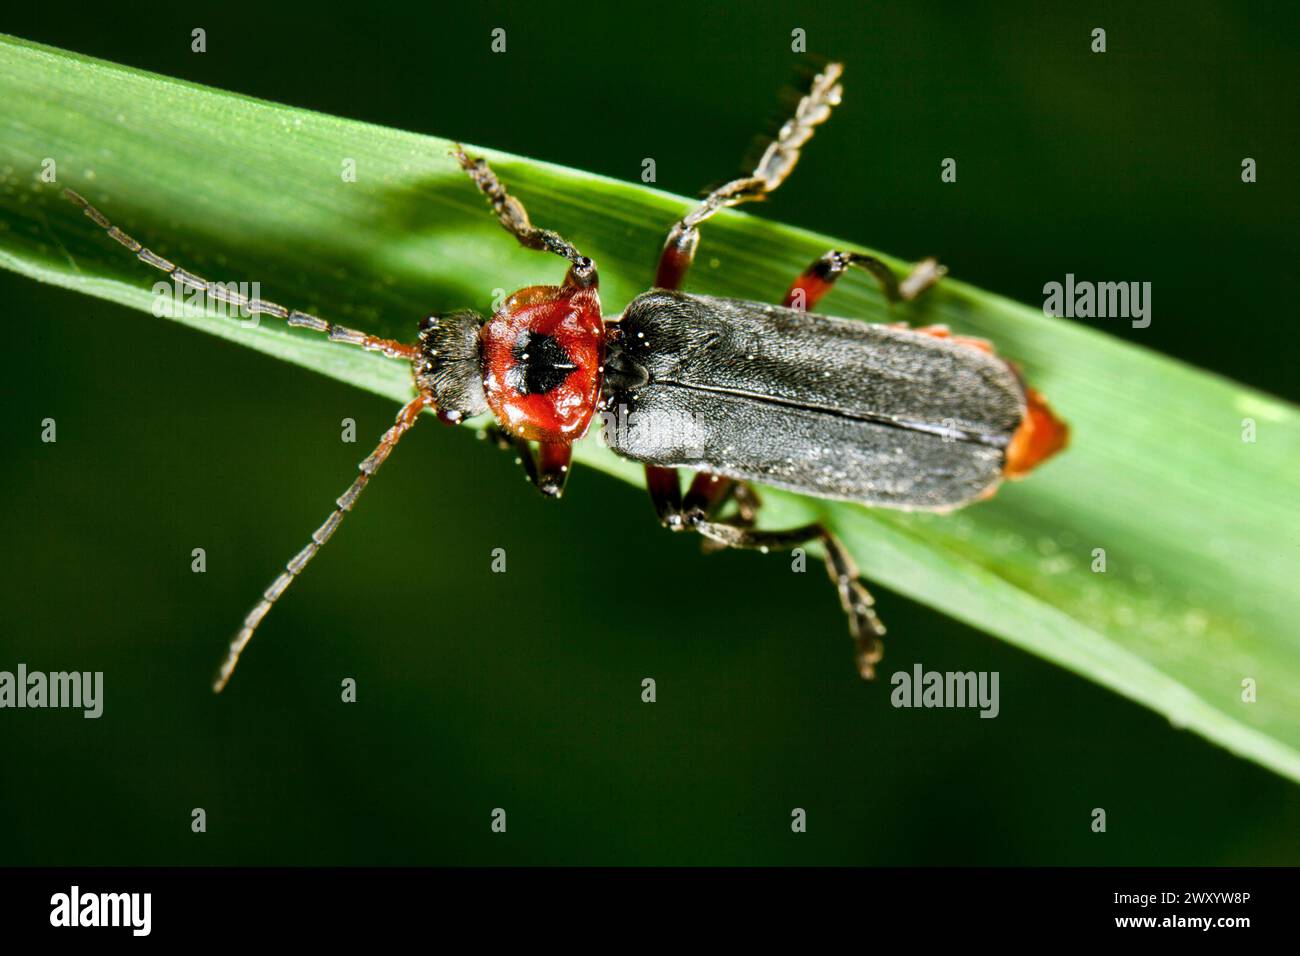 Soldier beetle (Cantharis rustica), sitting on a leaf, Germany Stock Photo